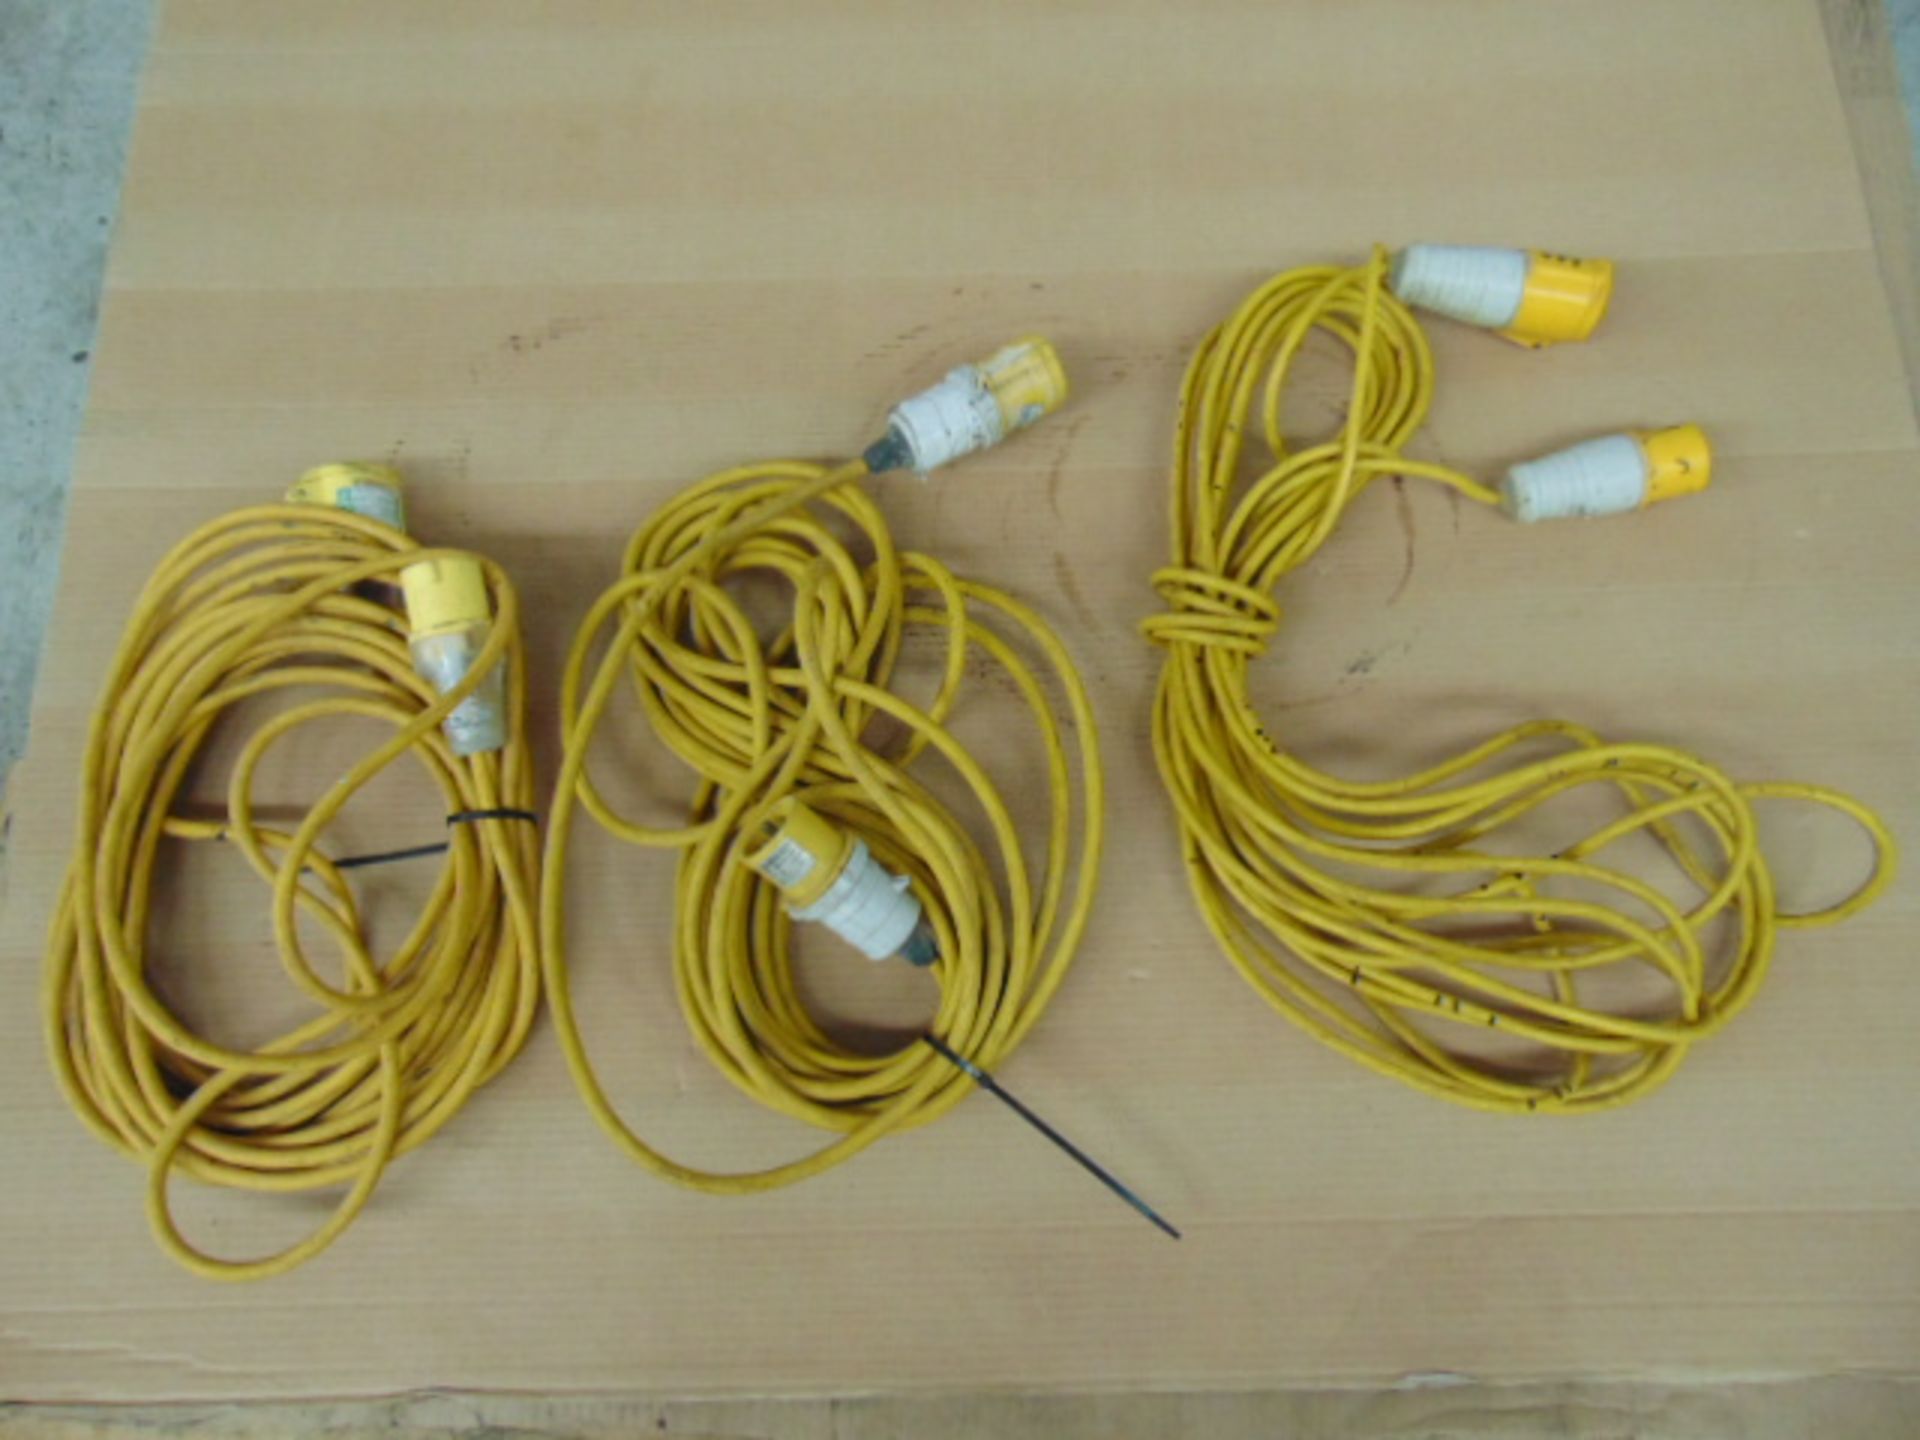 3 x 110V Extension Cables